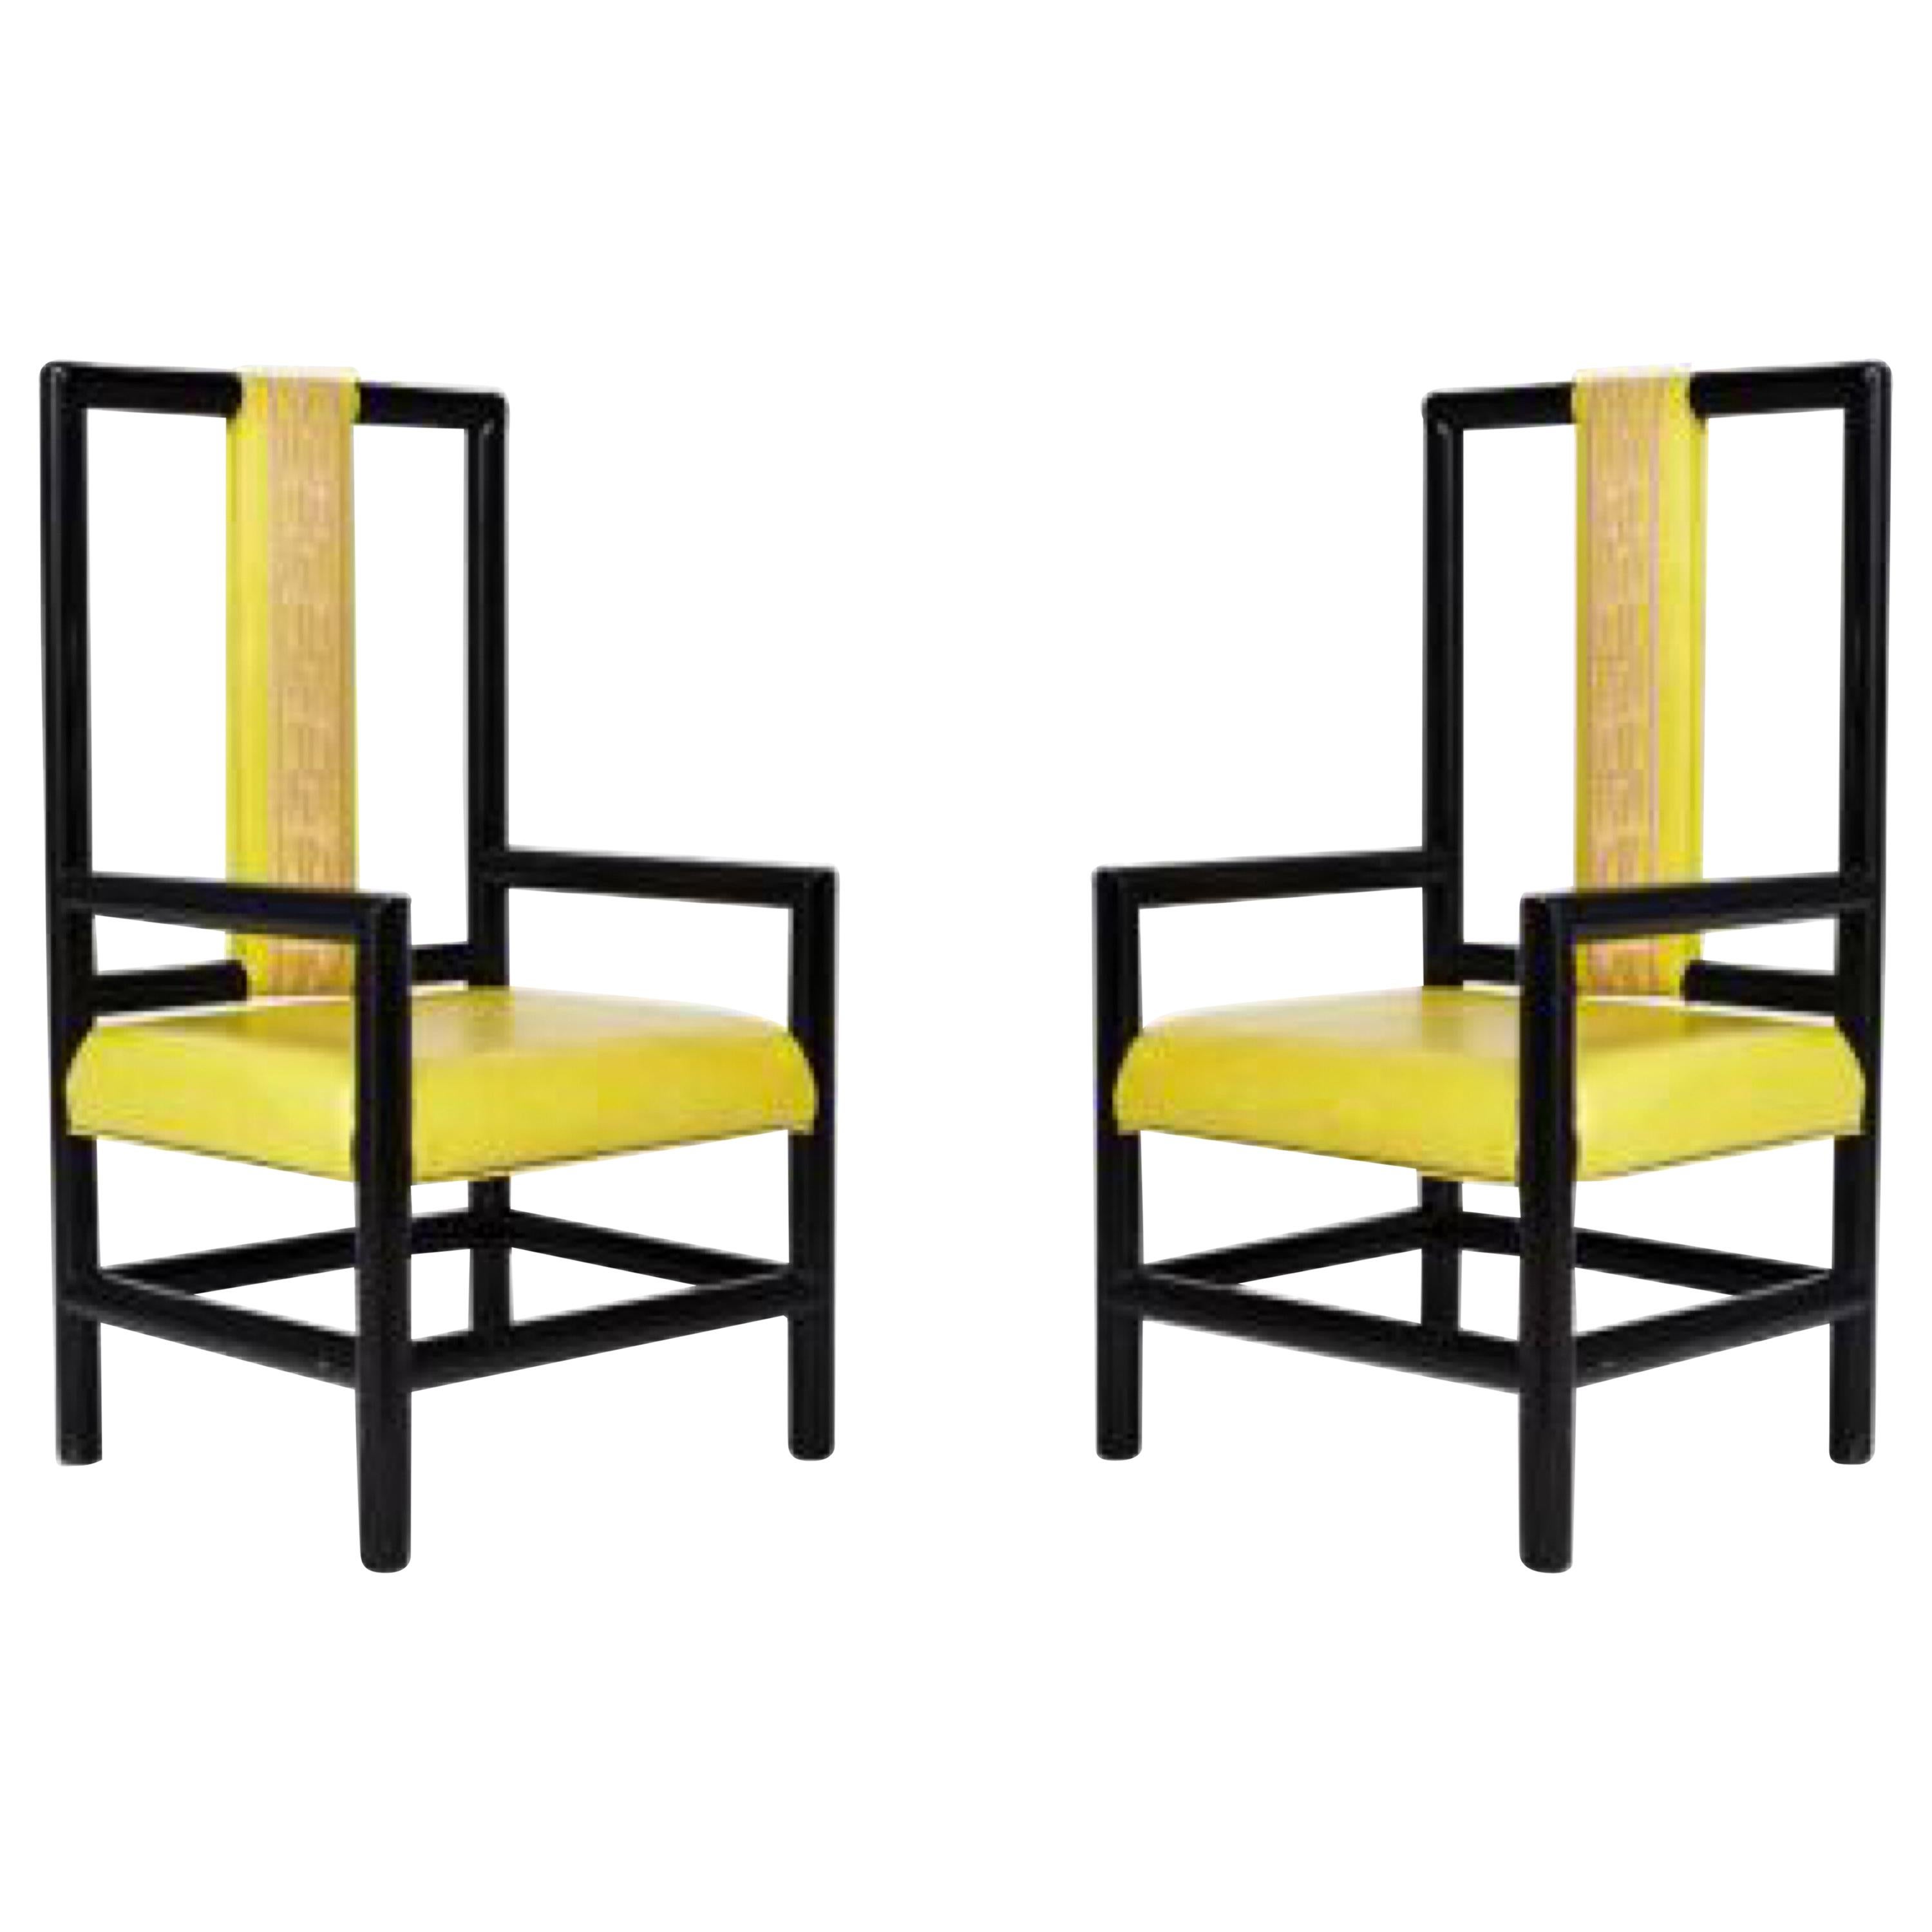 Pair of High Back Armchair by Kelly Wearstler for the Viceroy Hotel